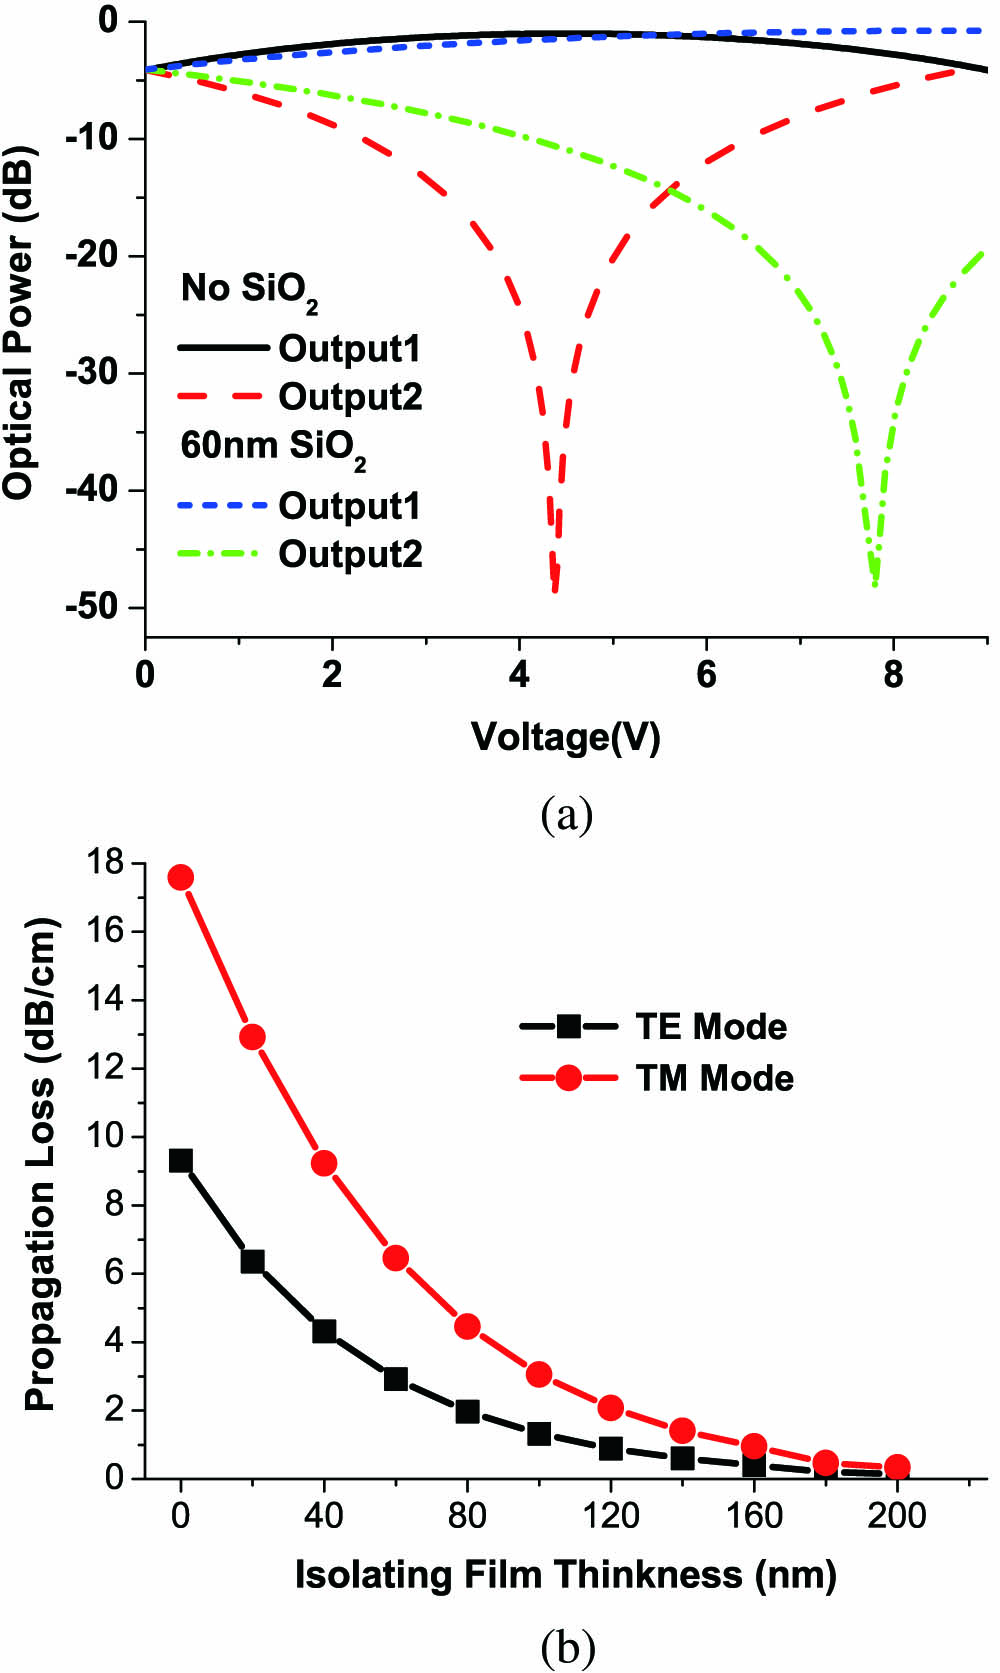 Simulation results of the switches. (a) Voltage response of 1×2 PLZT optical switches. (b) The relationship between the isolating film thickness and the optical absorption by the electrodes.